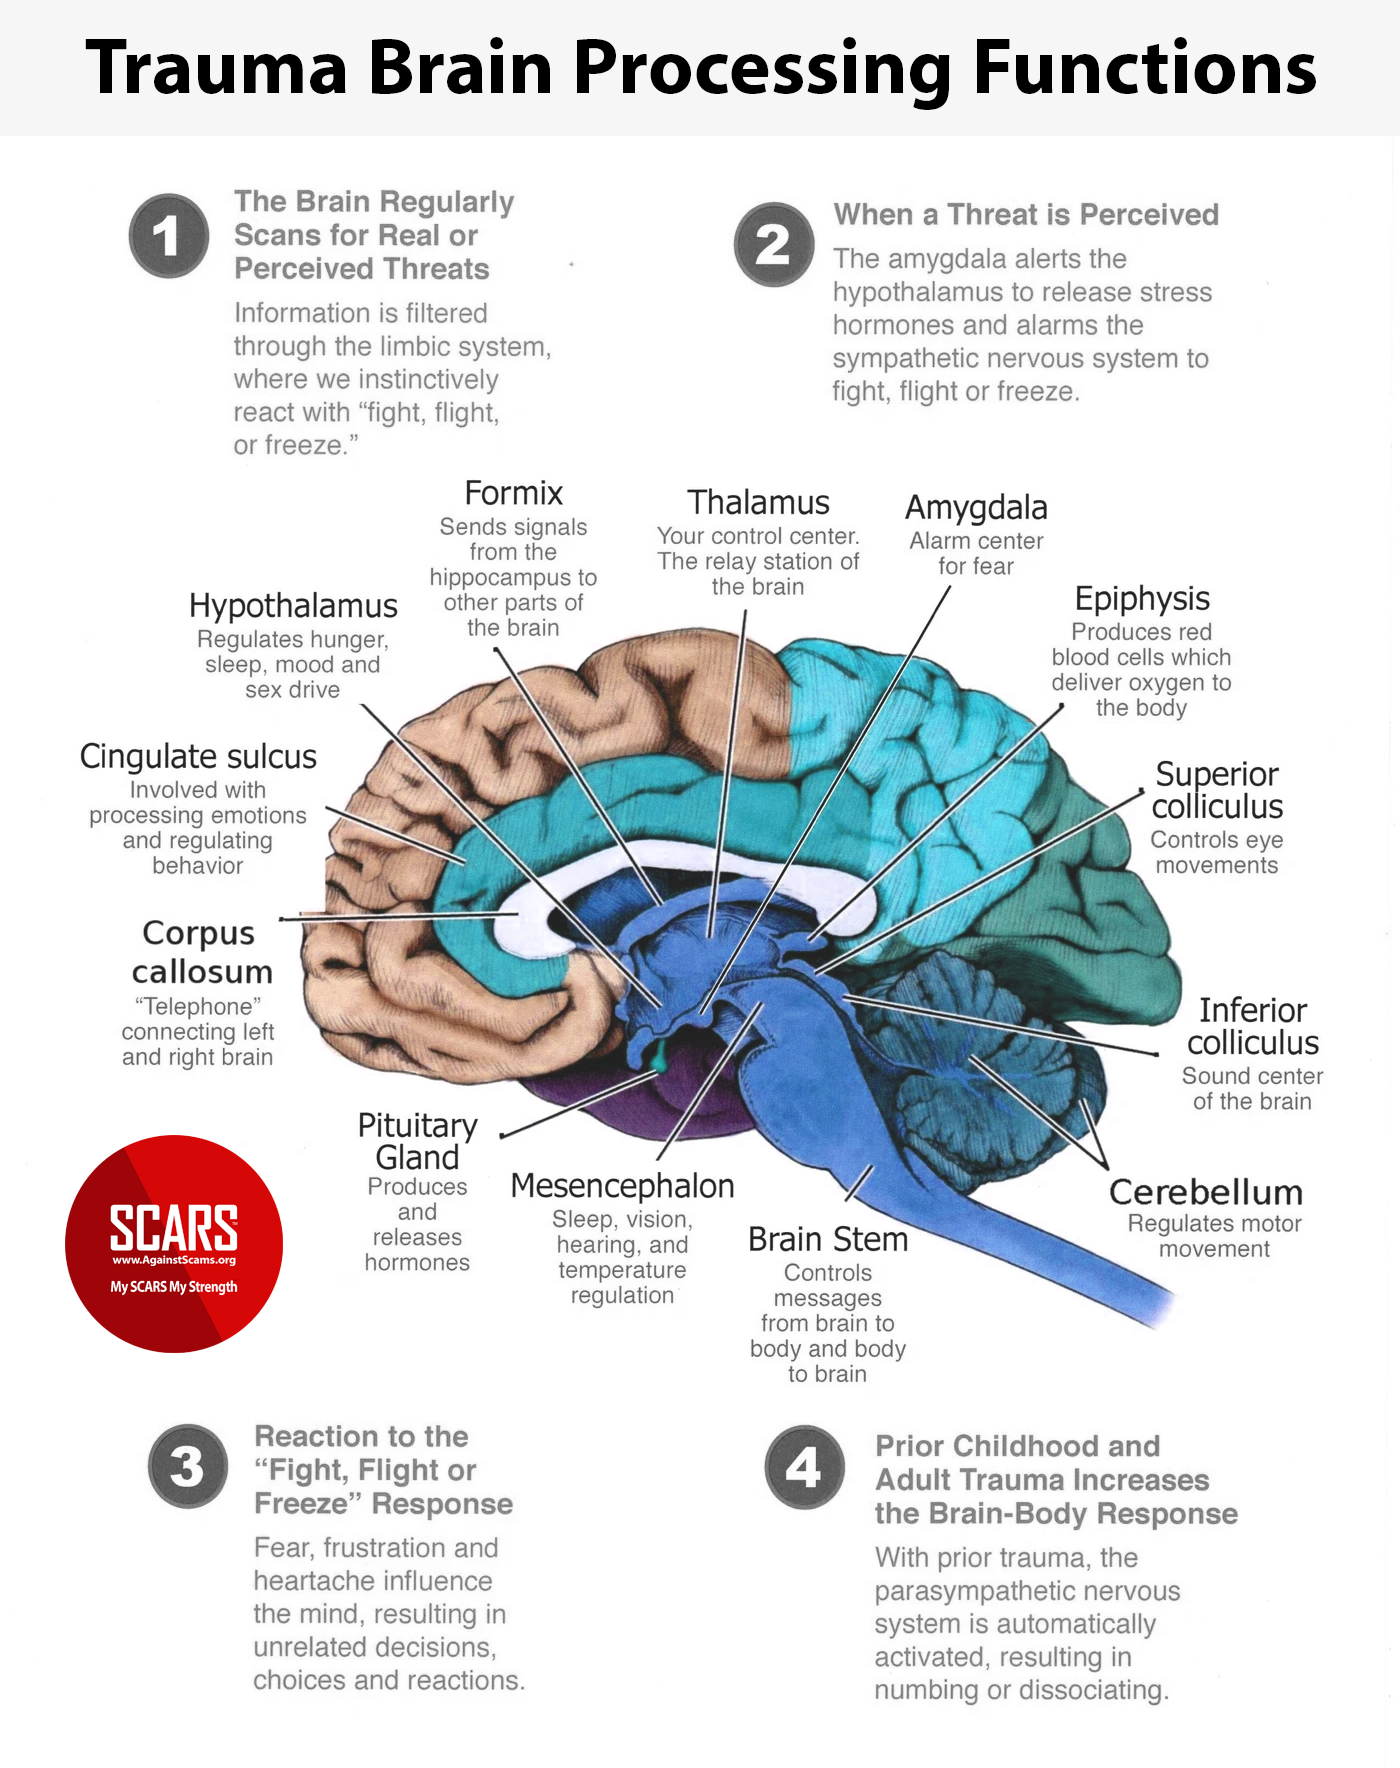 Trauma - Brain Processing Functions - Infographic 9